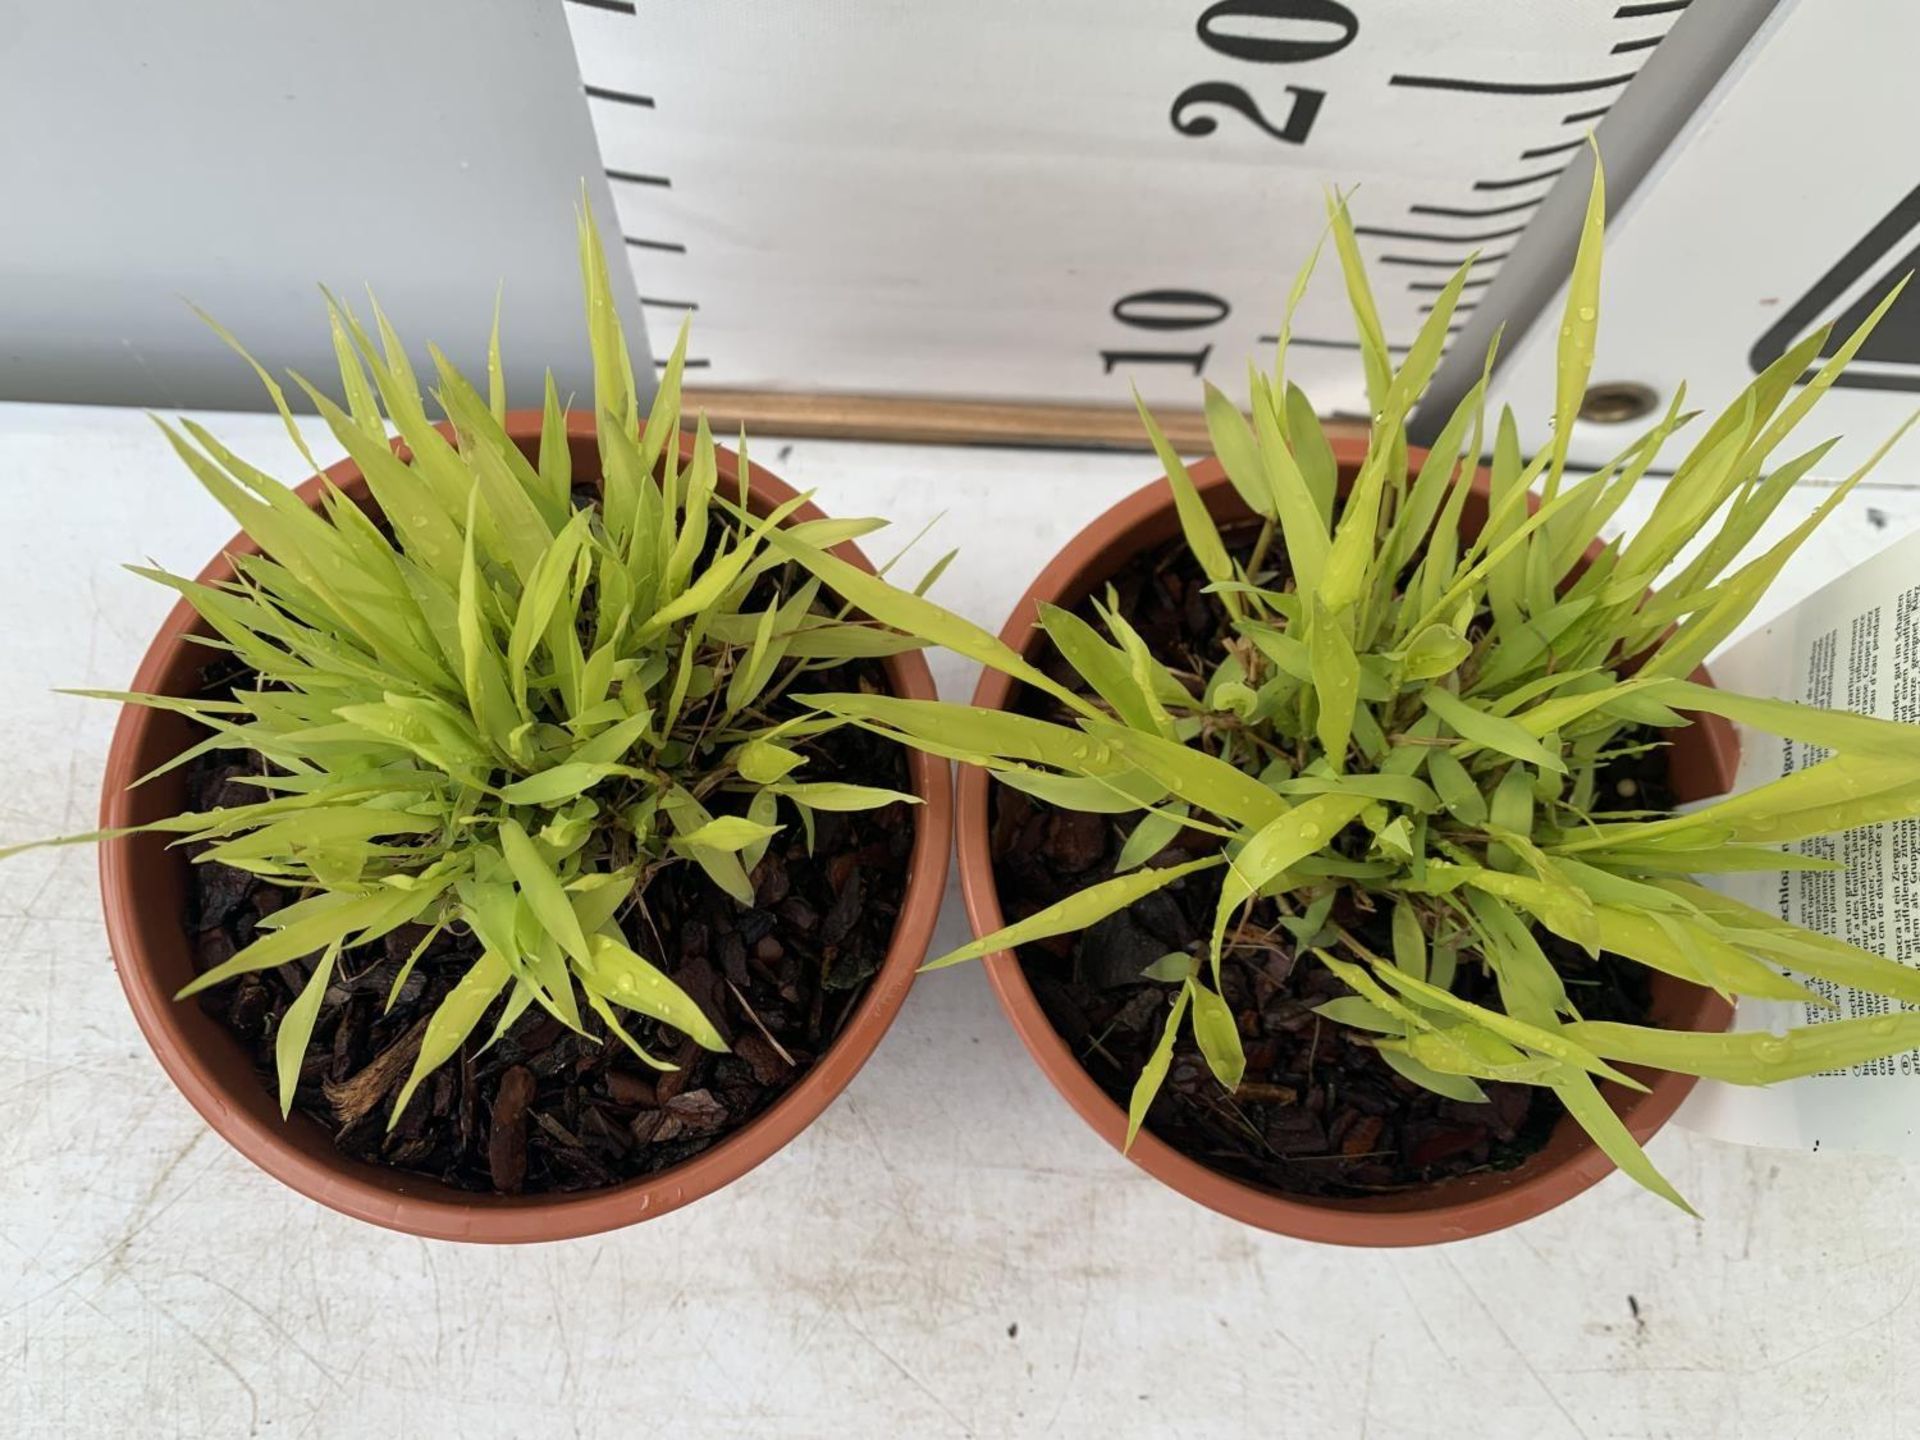 TWO ORNAMENTAL GRASSES HAKONECHLOA MACRA 'ALLGOLD' IN 1 LTR POTS PLUS VAT TO BE SOLD FOR THE TWO - Image 6 of 8